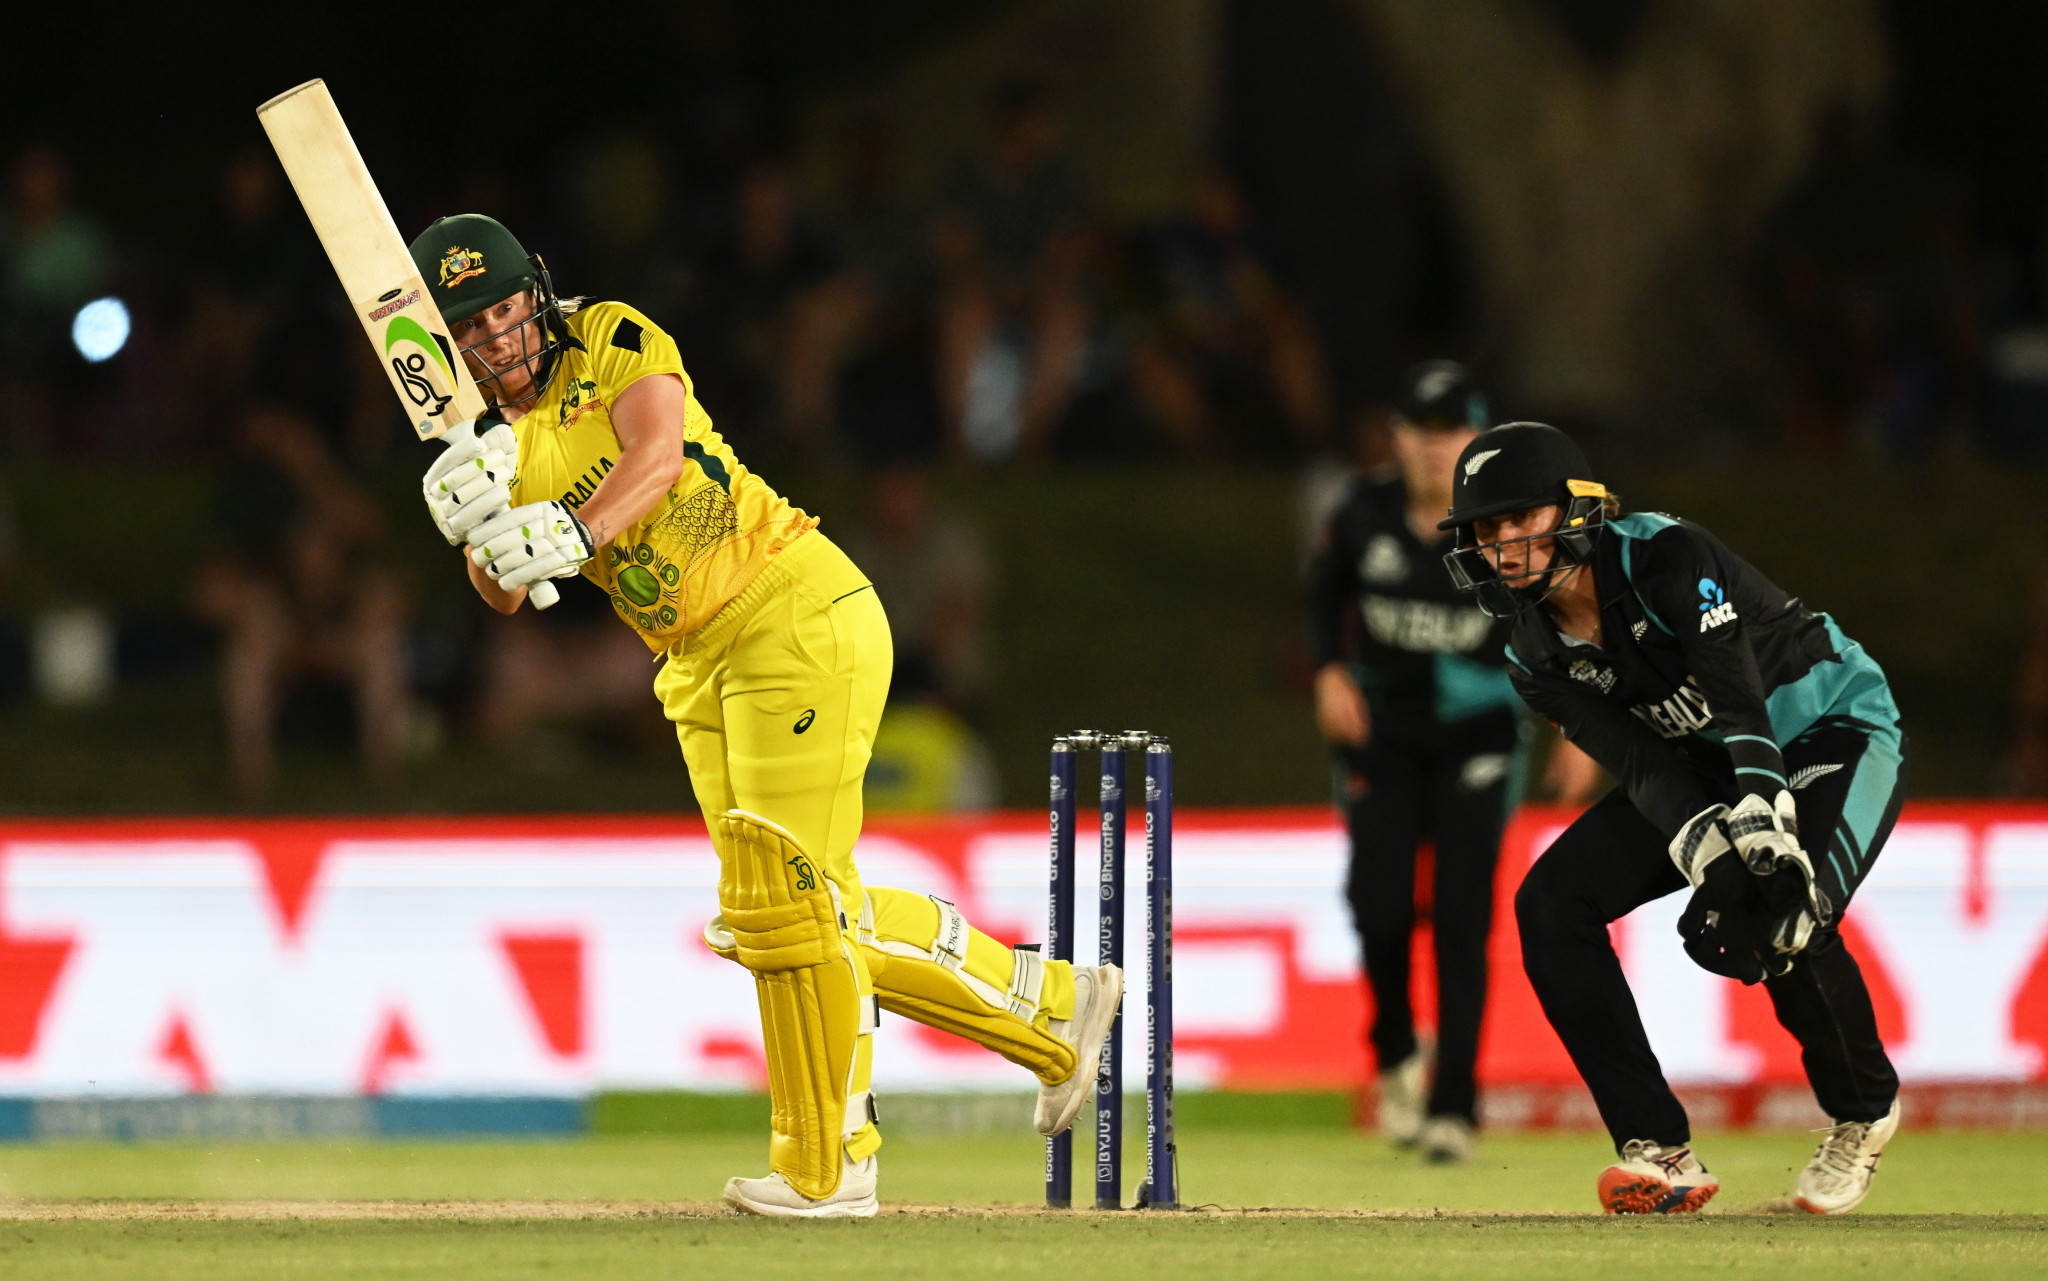 Alyssa Healy hit 55 as holders Australia started their Women's T20 World Cup defence with a win ©Getty Images